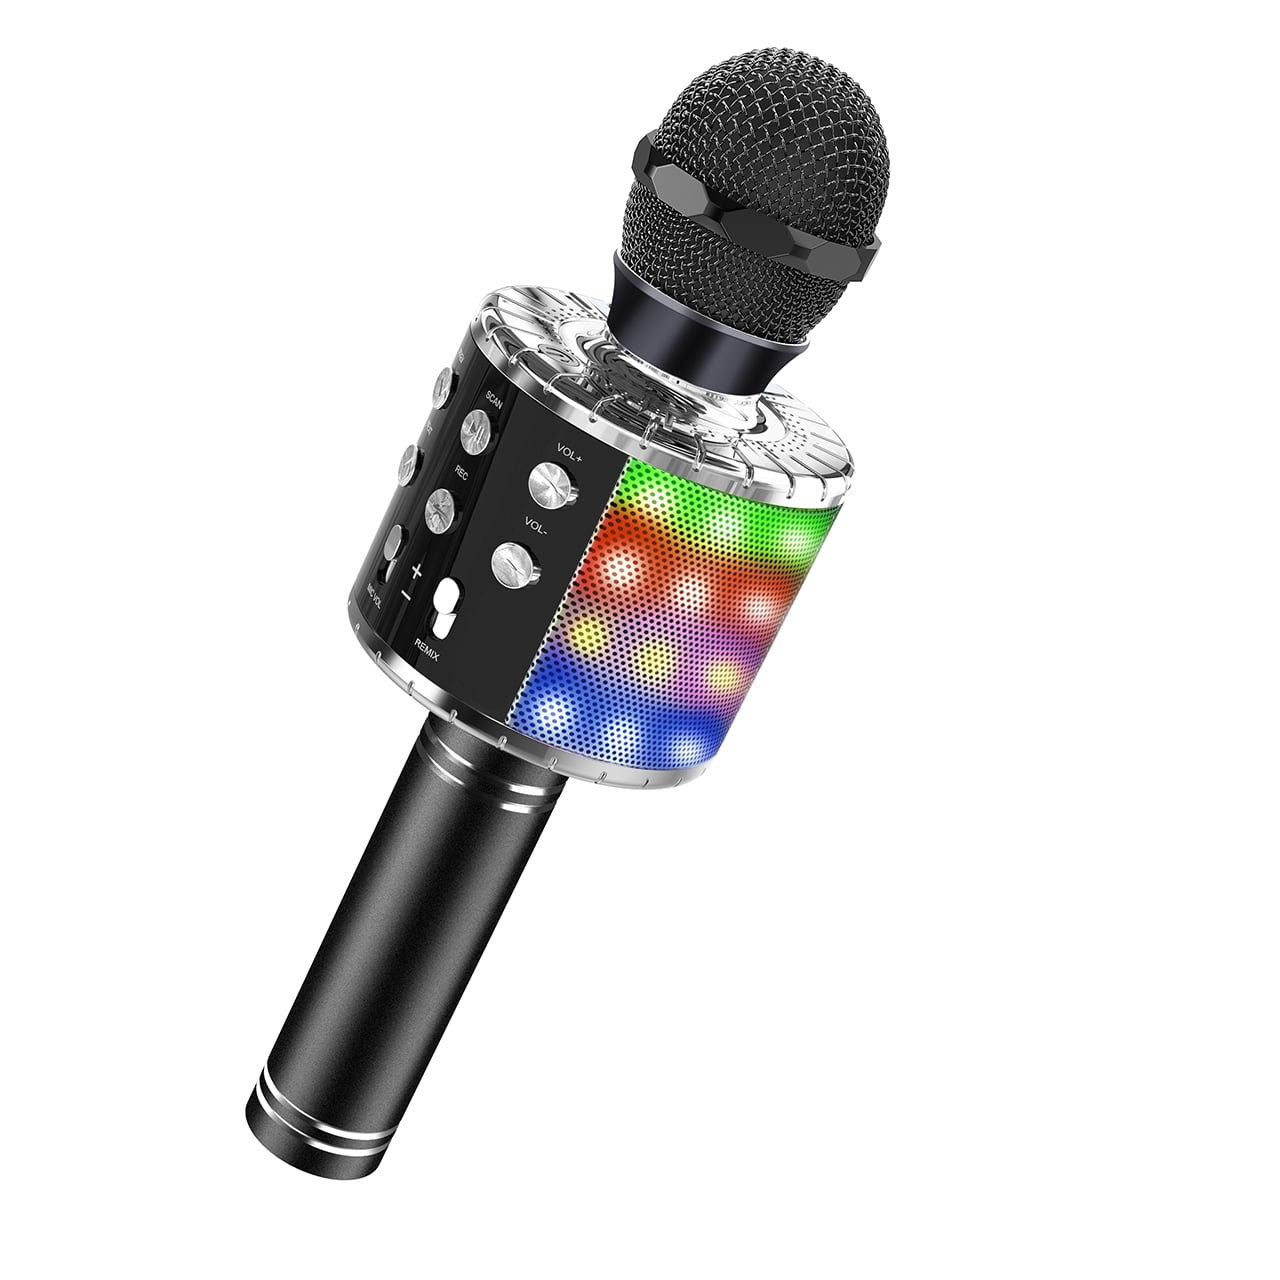 Wireless Bluetooth Karaoke Microphone Compatible with Android & iOS/PC 4 in 1 Magic Sound Portable Handheld Home Party KTV Player Karaoke Machine for Kids Adults with LED Lights Black